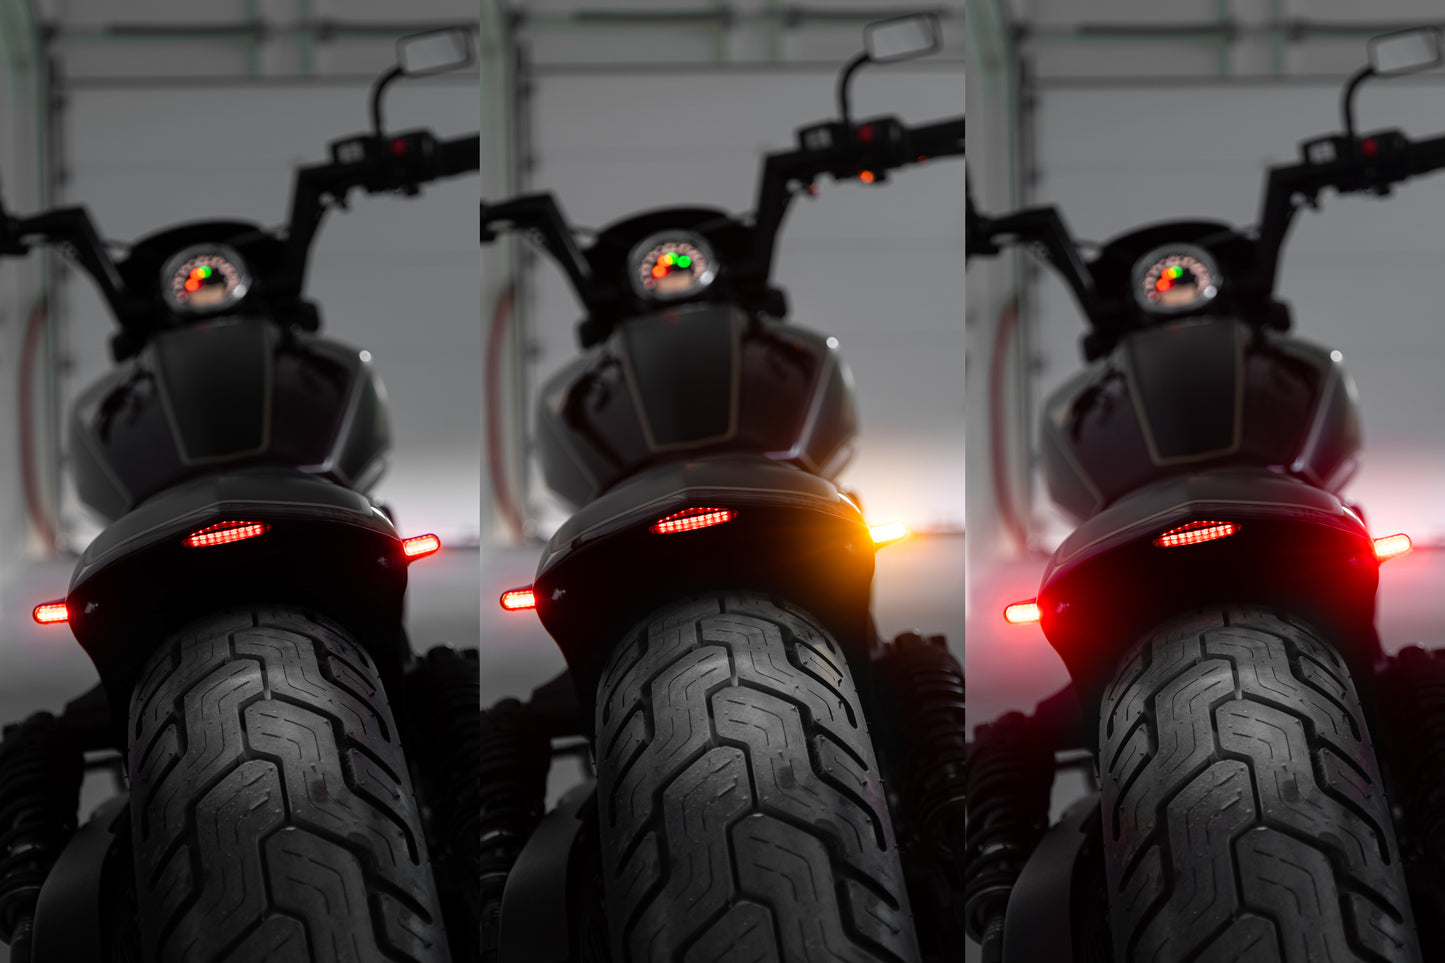 3x Harley Davidson motorcycle with Killer Custom "Mohawk" led rear taillight/turn signal combo from the rear in a modern garage